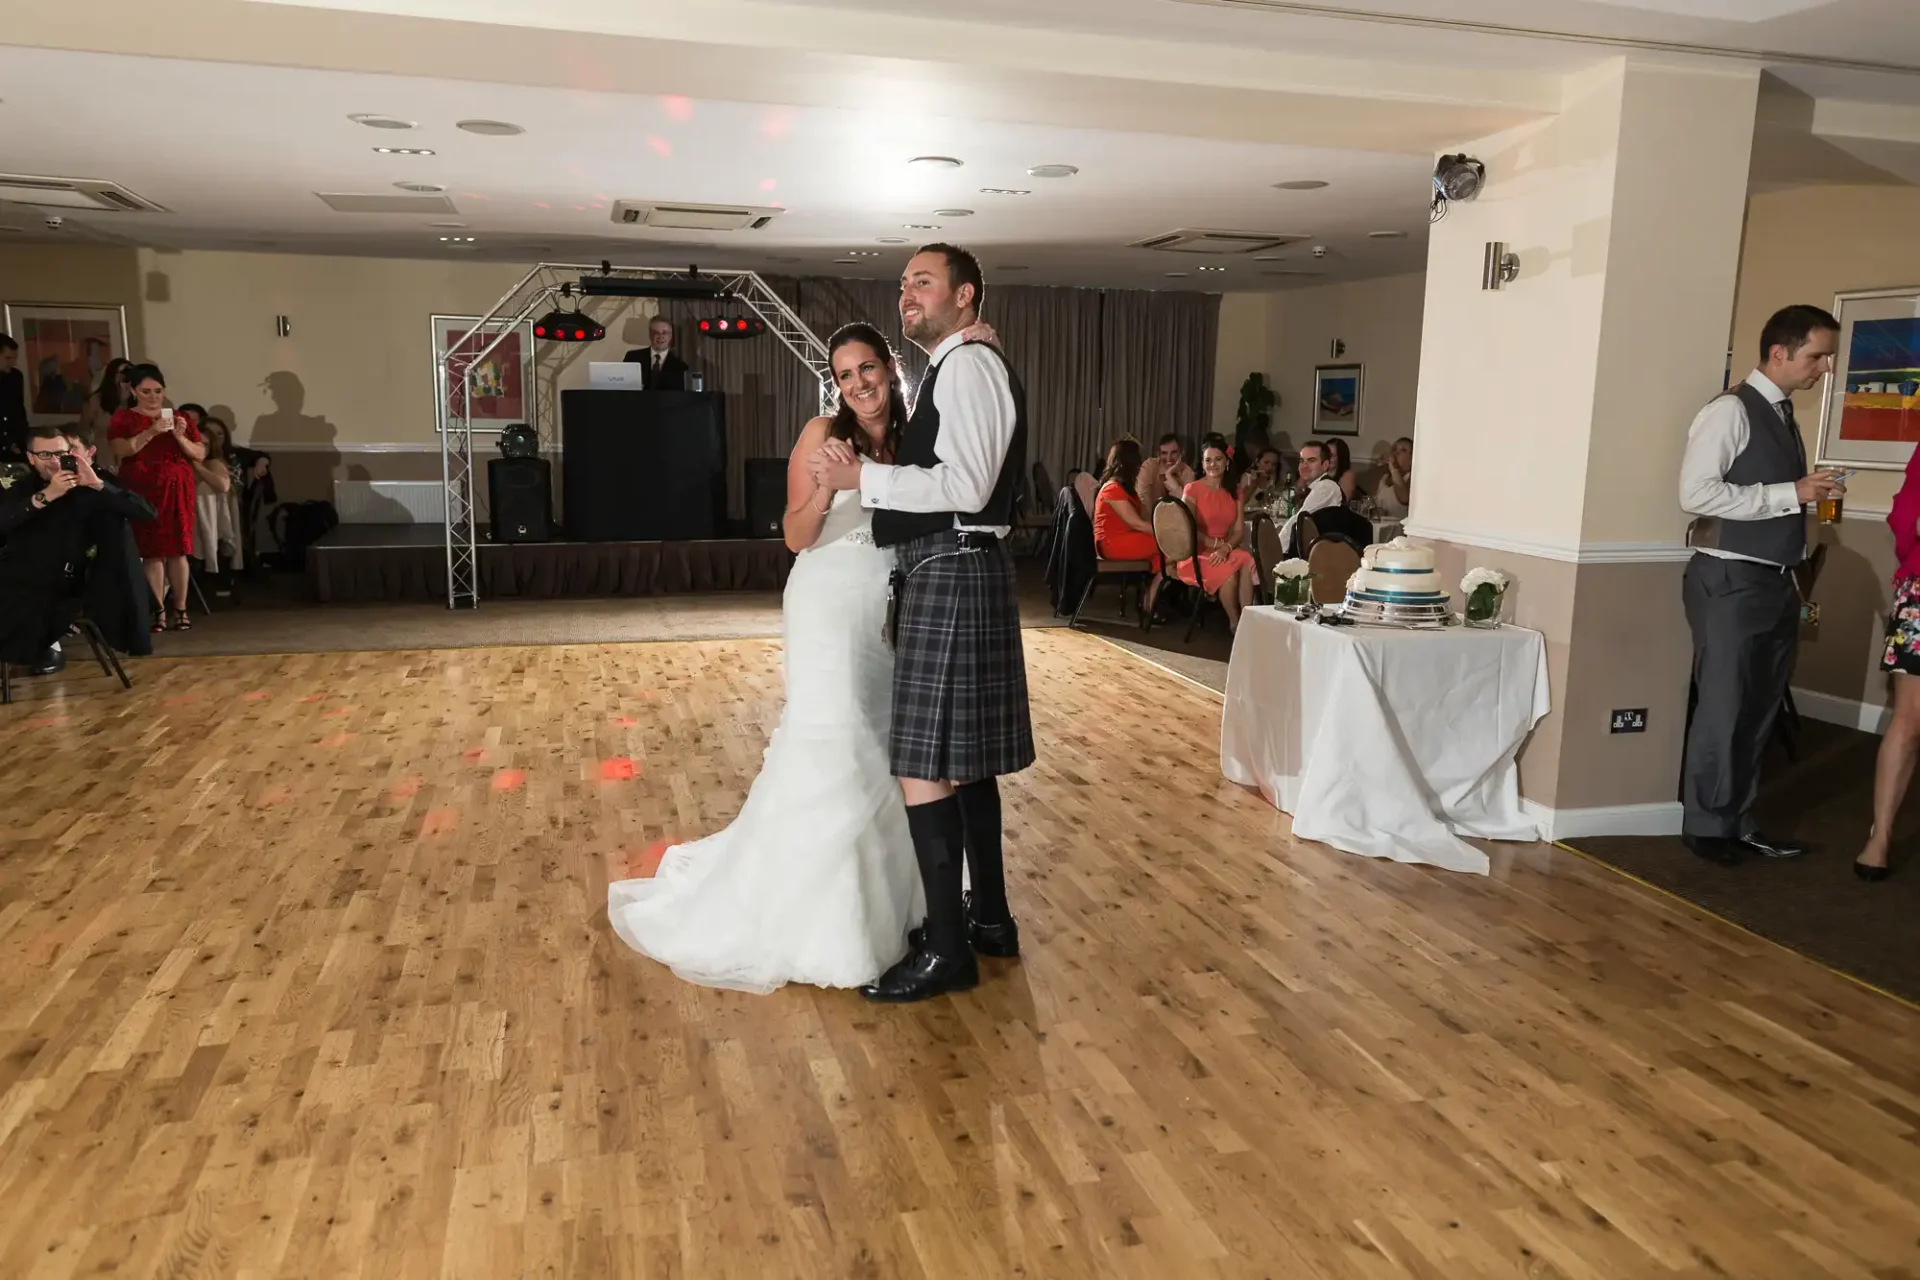 A bride in a white dress and a groom in a kilt embrace while dancing at a wedding reception, with guests watching and a dj booth in the background.